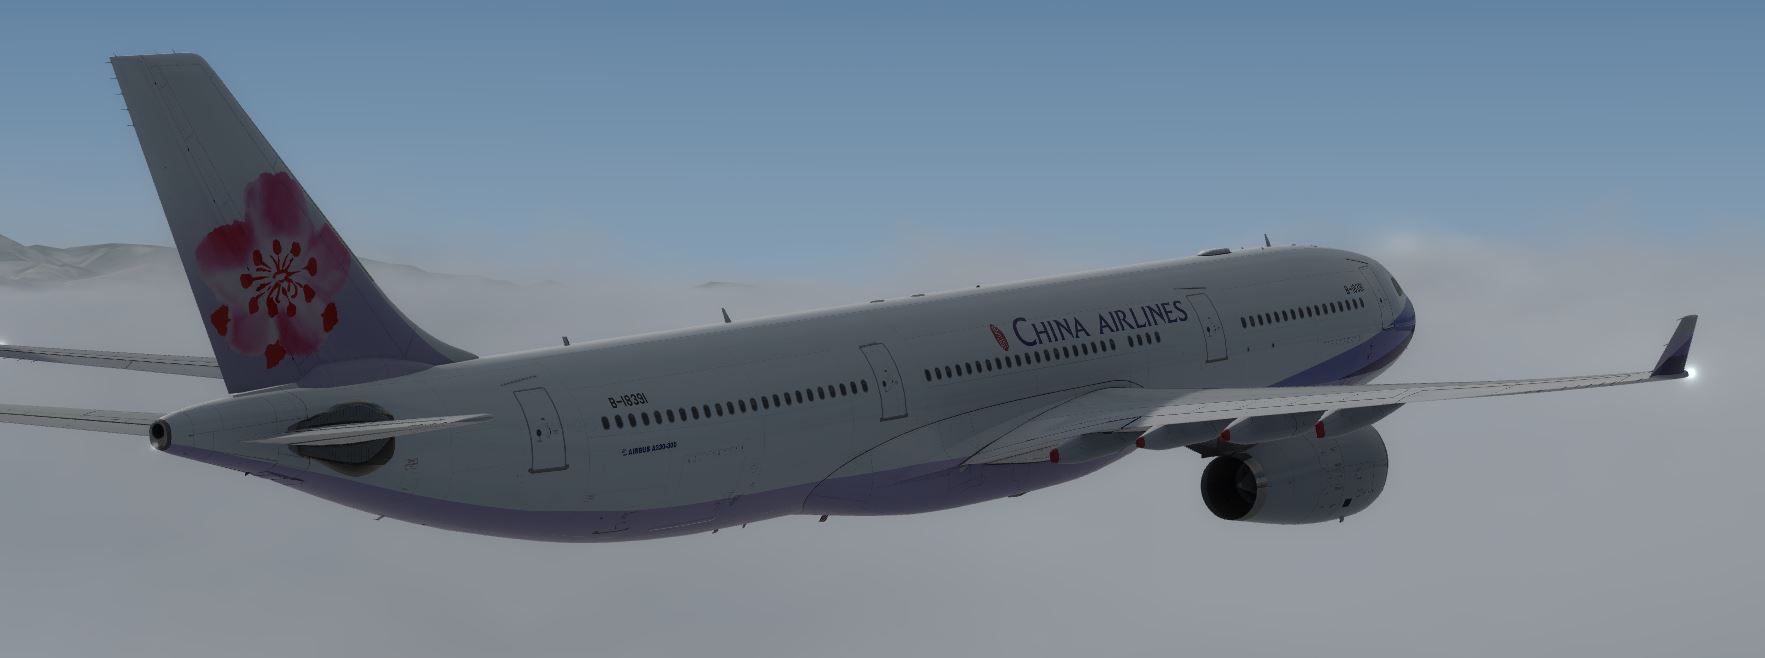 AS A330 ChinaAirline-8140 